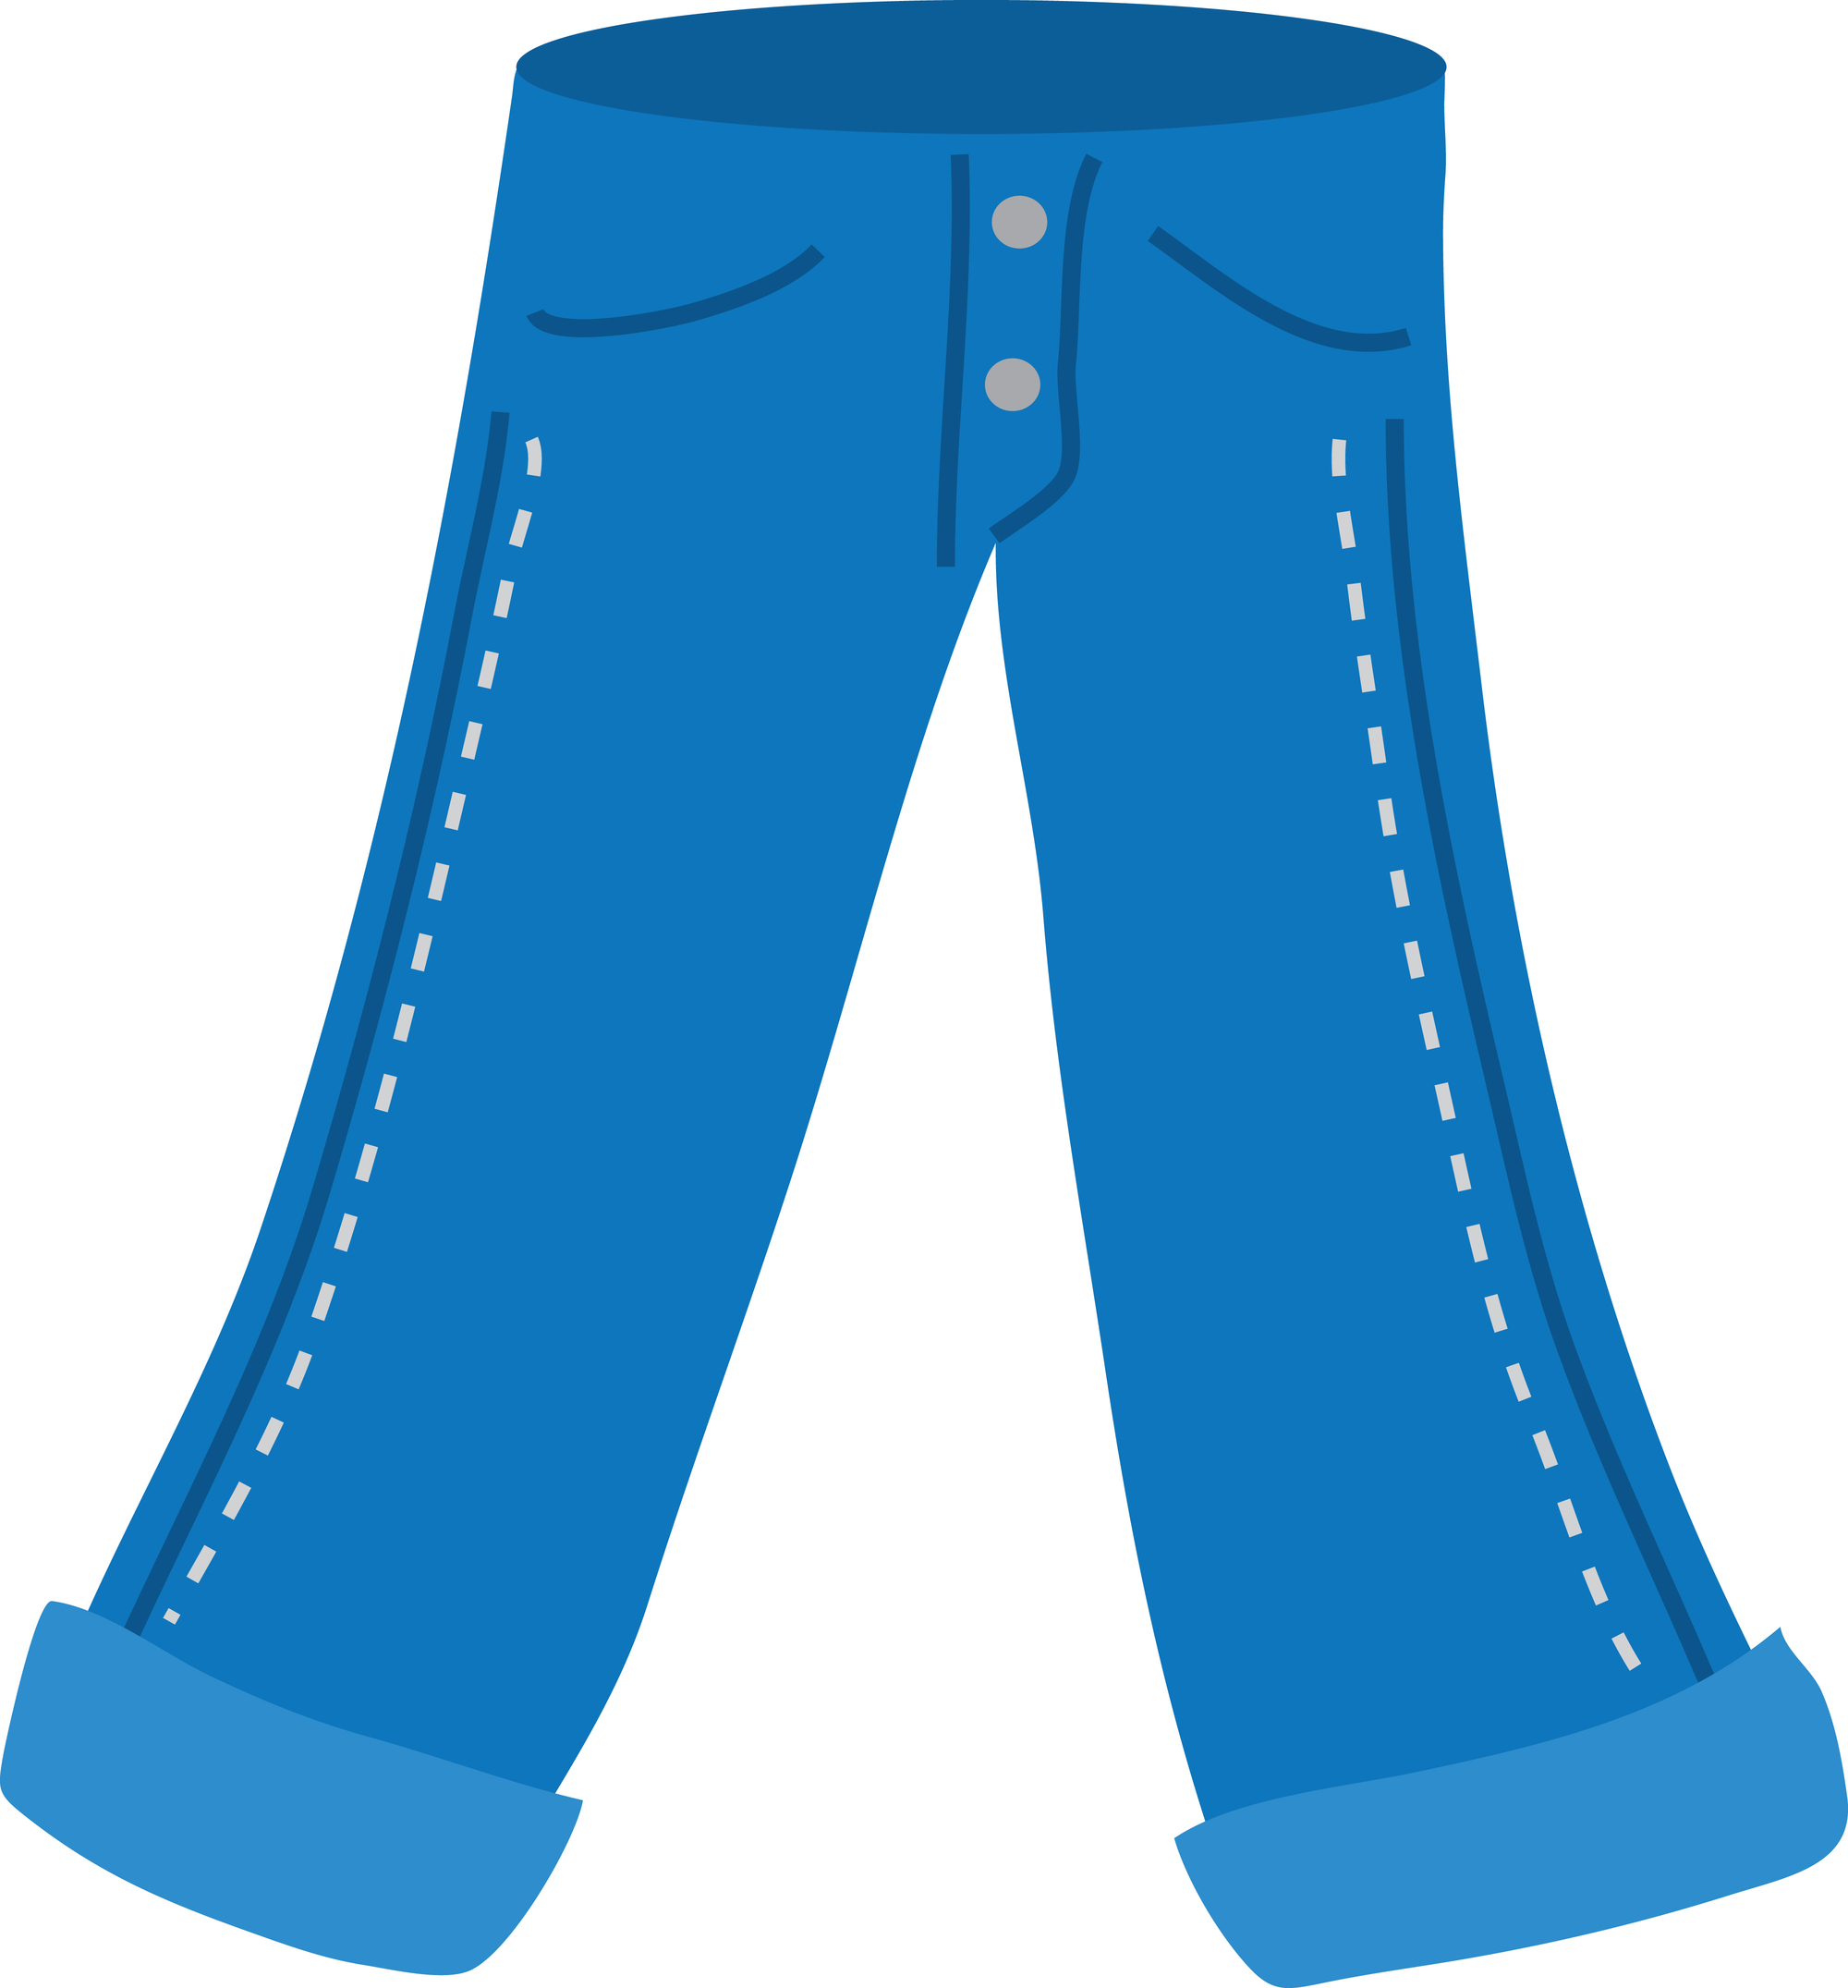 pics-of-jeans-cliparts-co